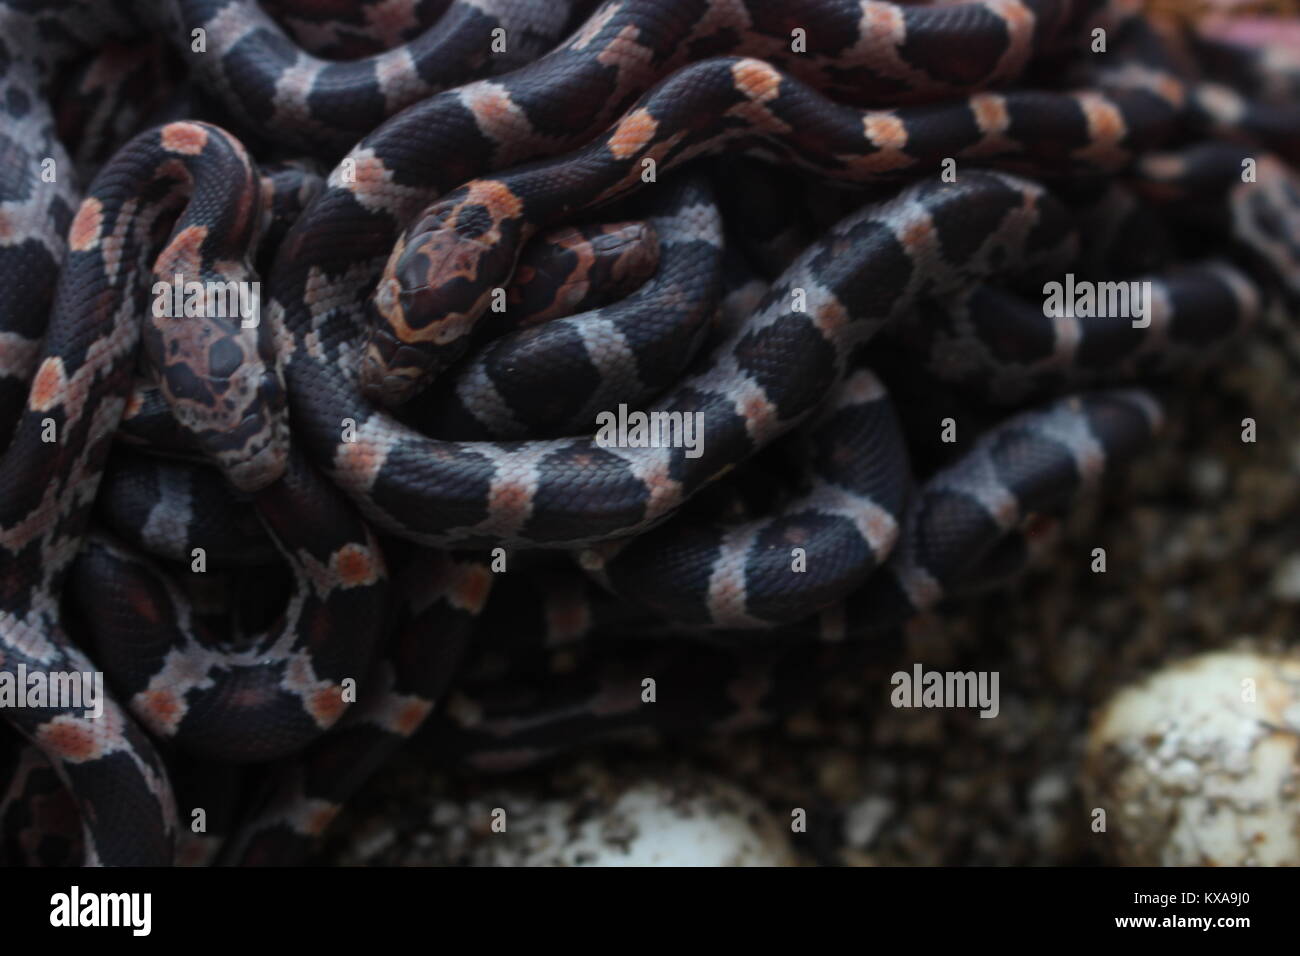 A ball of recently hatched baby corn snakes (Pantherophis guttatus). Corn snakes are some of the most popular pet snakes in Western countries today. Stock Photo